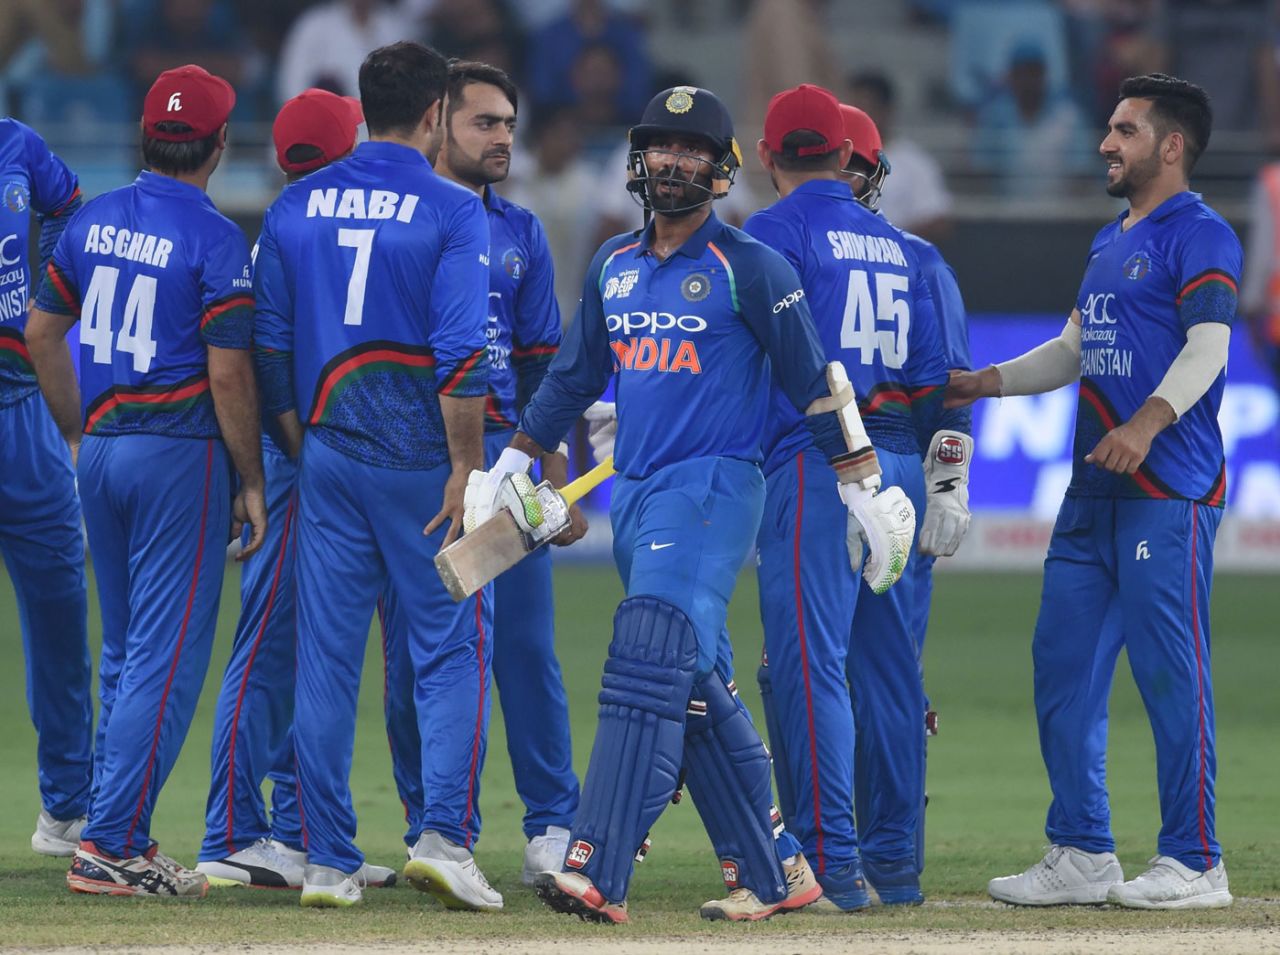 Dinesh Karthik walks off in disappointment after getting a wrong decision, Afghanistan v India, Asia Cup 2018, Dubai, September 25, 2018